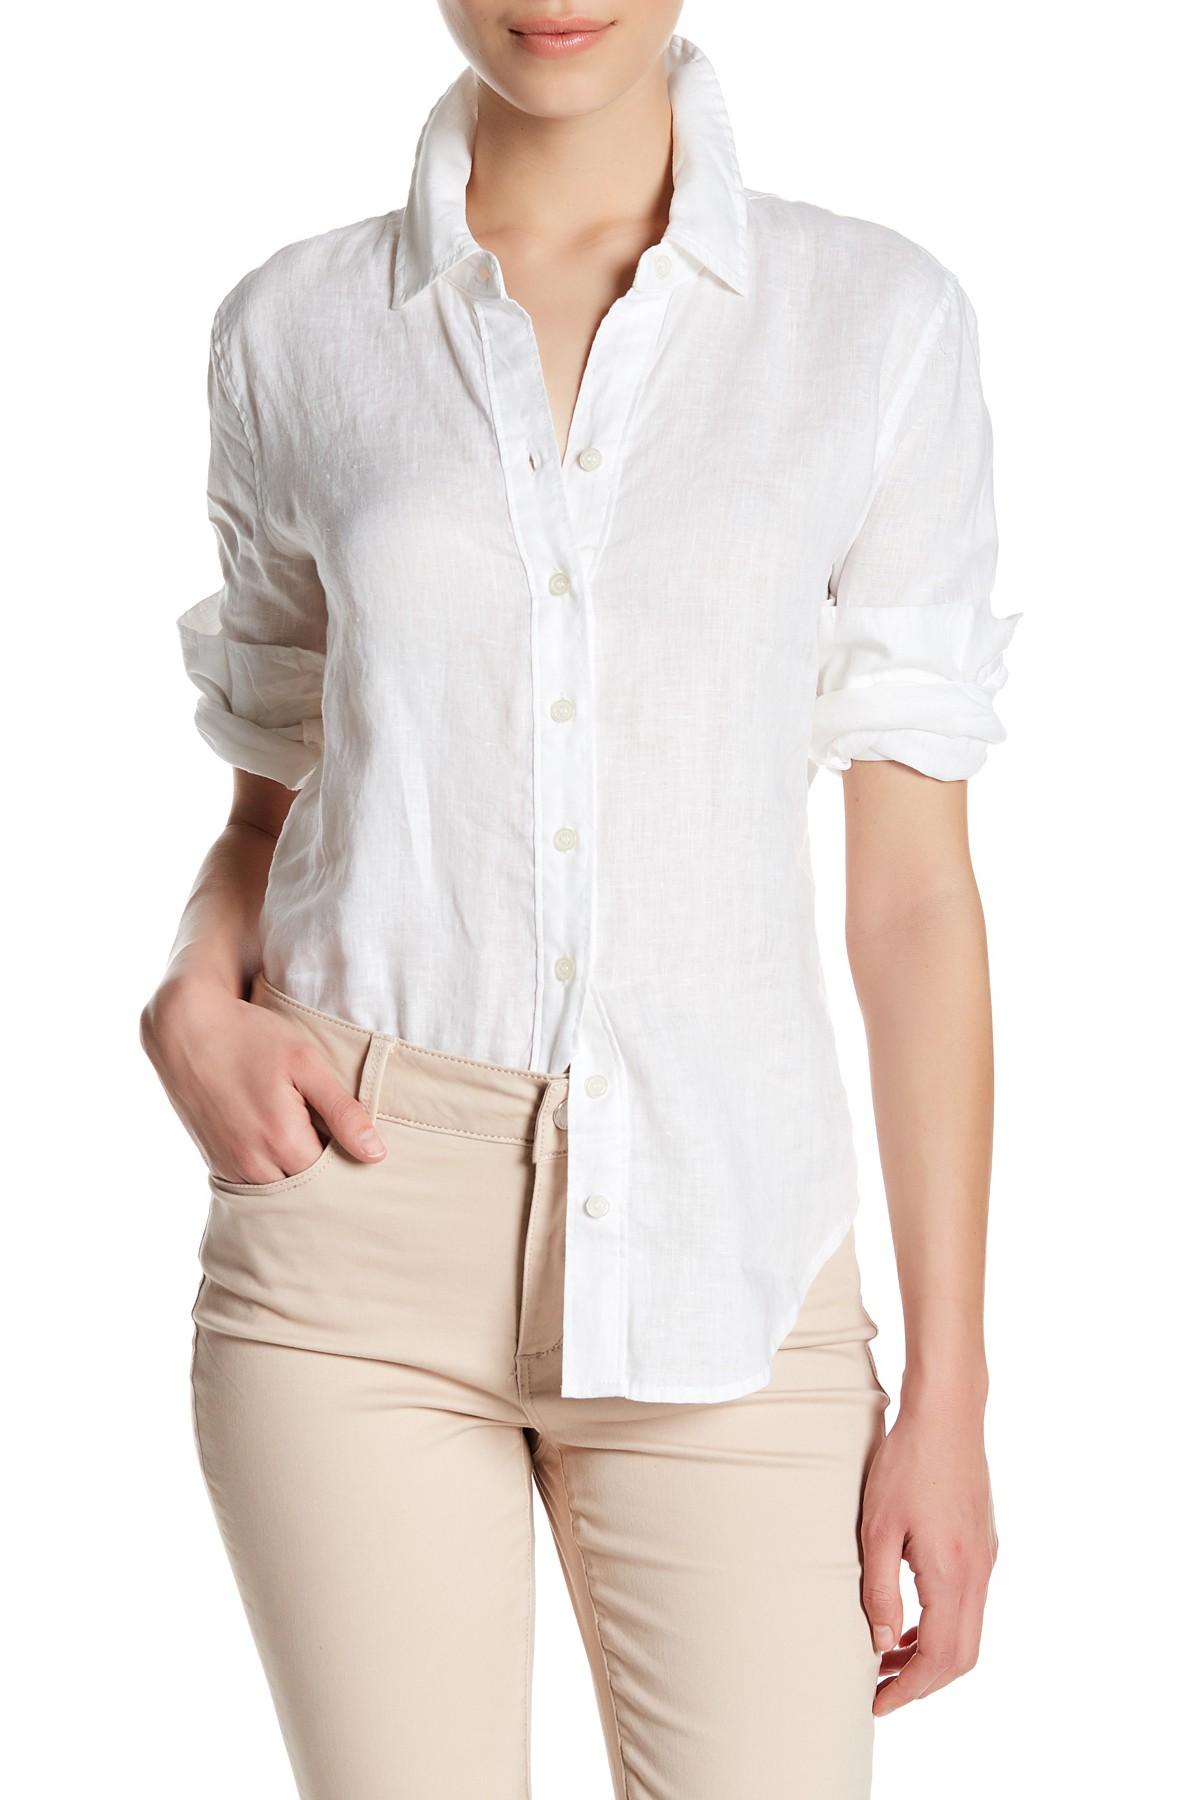 Workshop Long Sleeve Linen Button Up Shirt (petite) in White - Lyst